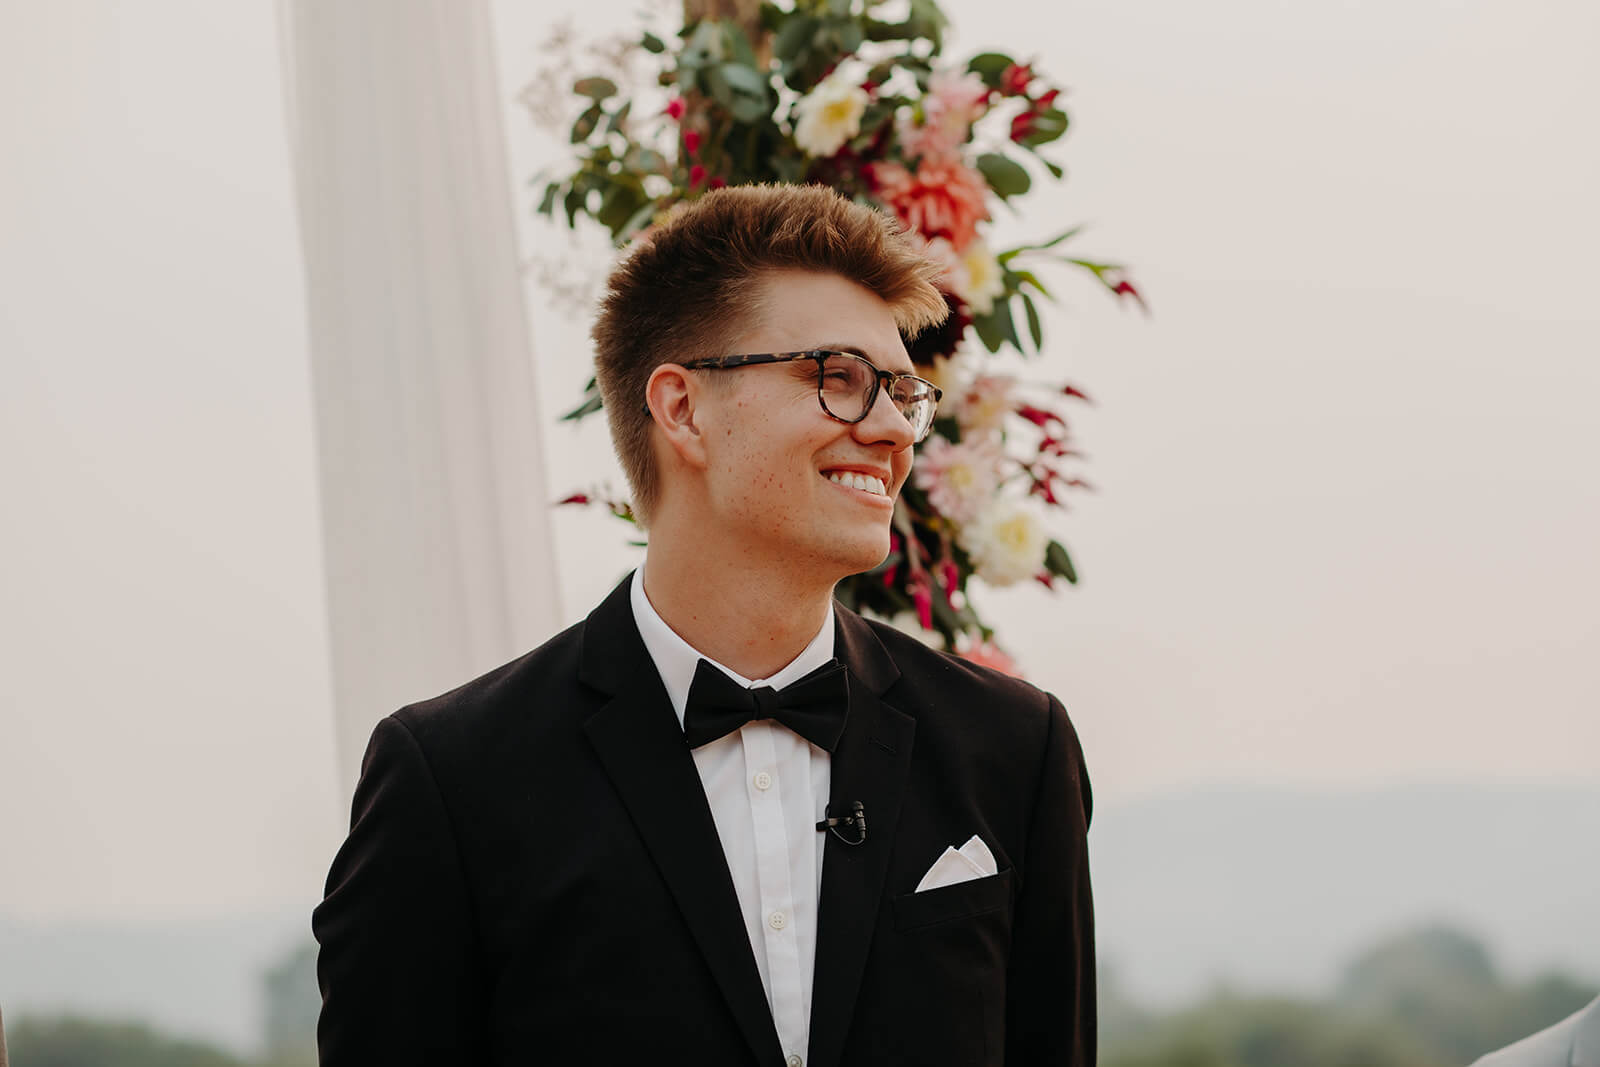 Groom smiling while watching bride walk down the wedding aisle